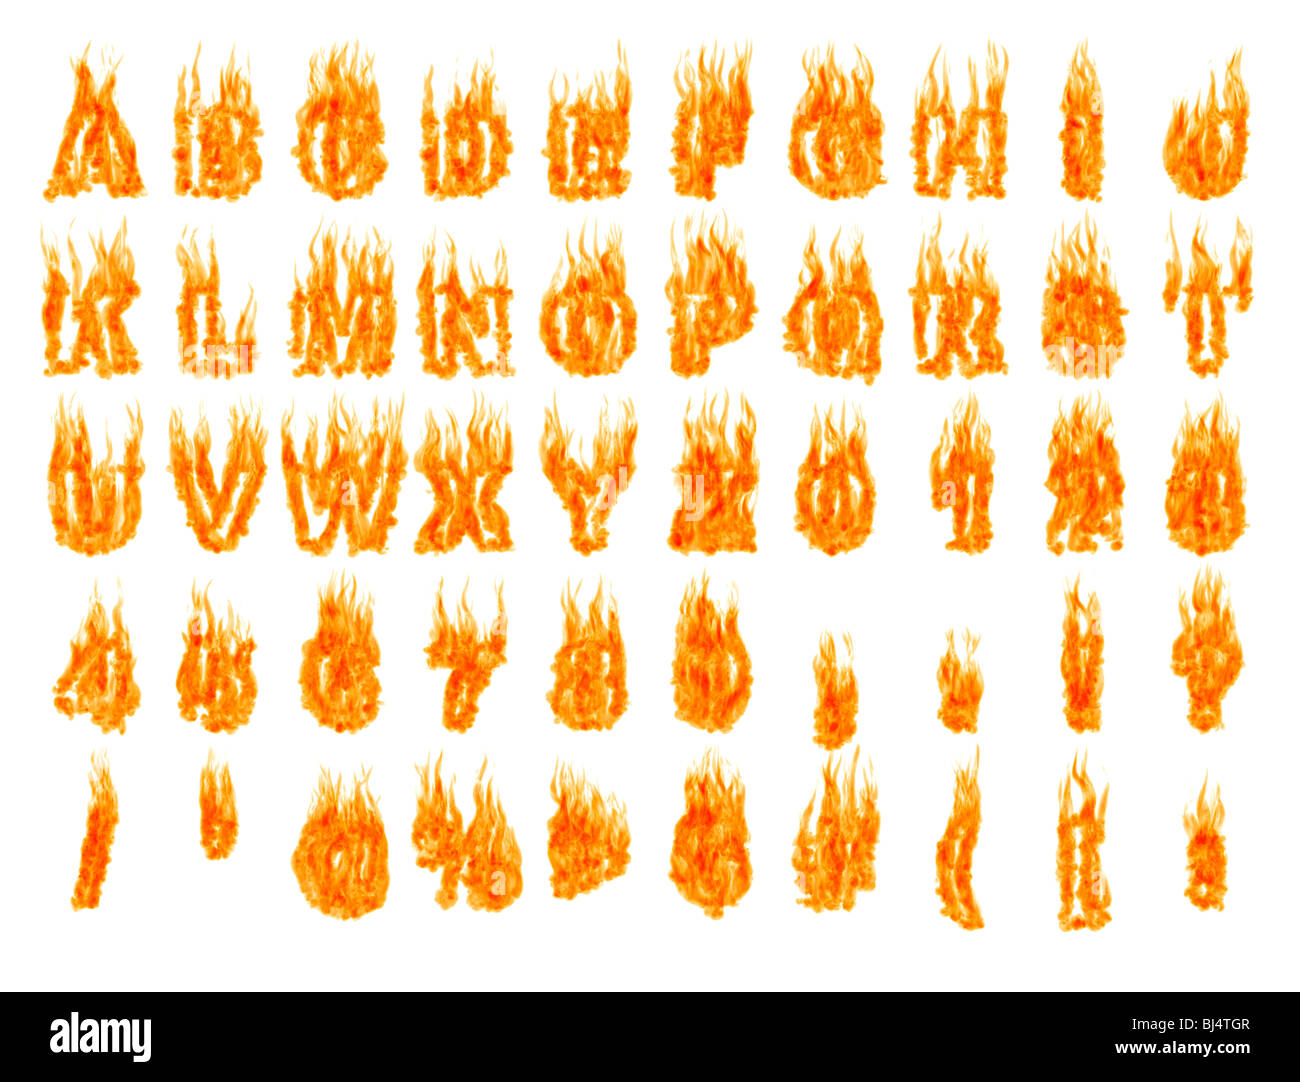 Burning alphabet letters and numbers isolated silhouettes on white background. Rendered 3D illustration Stock Photo